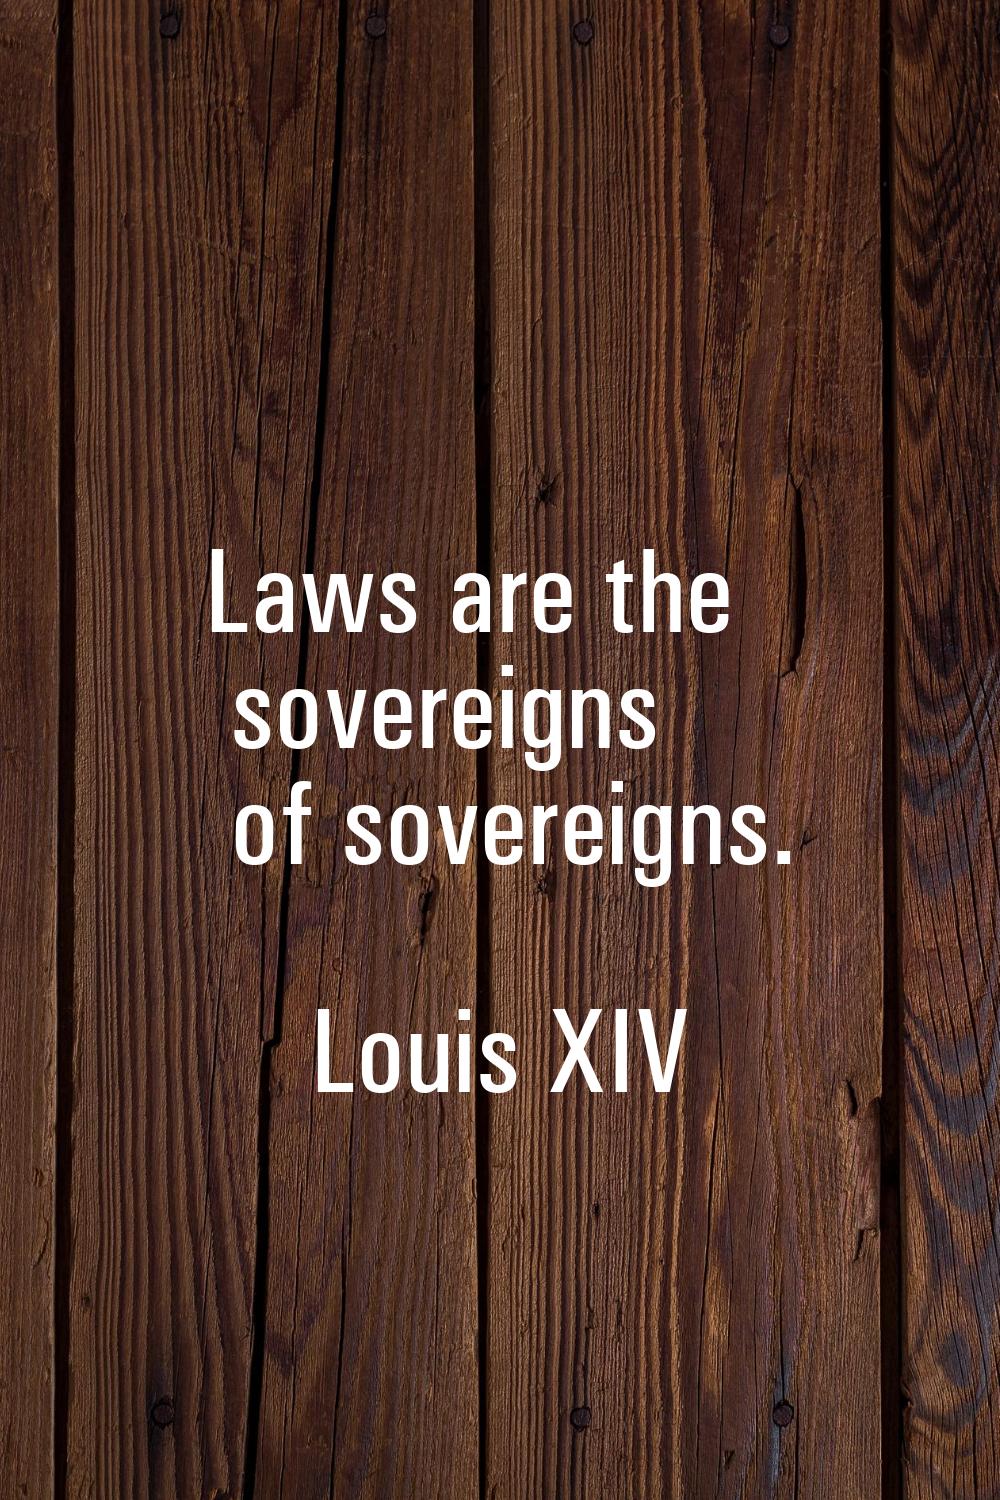 Laws are the sovereigns of sovereigns.